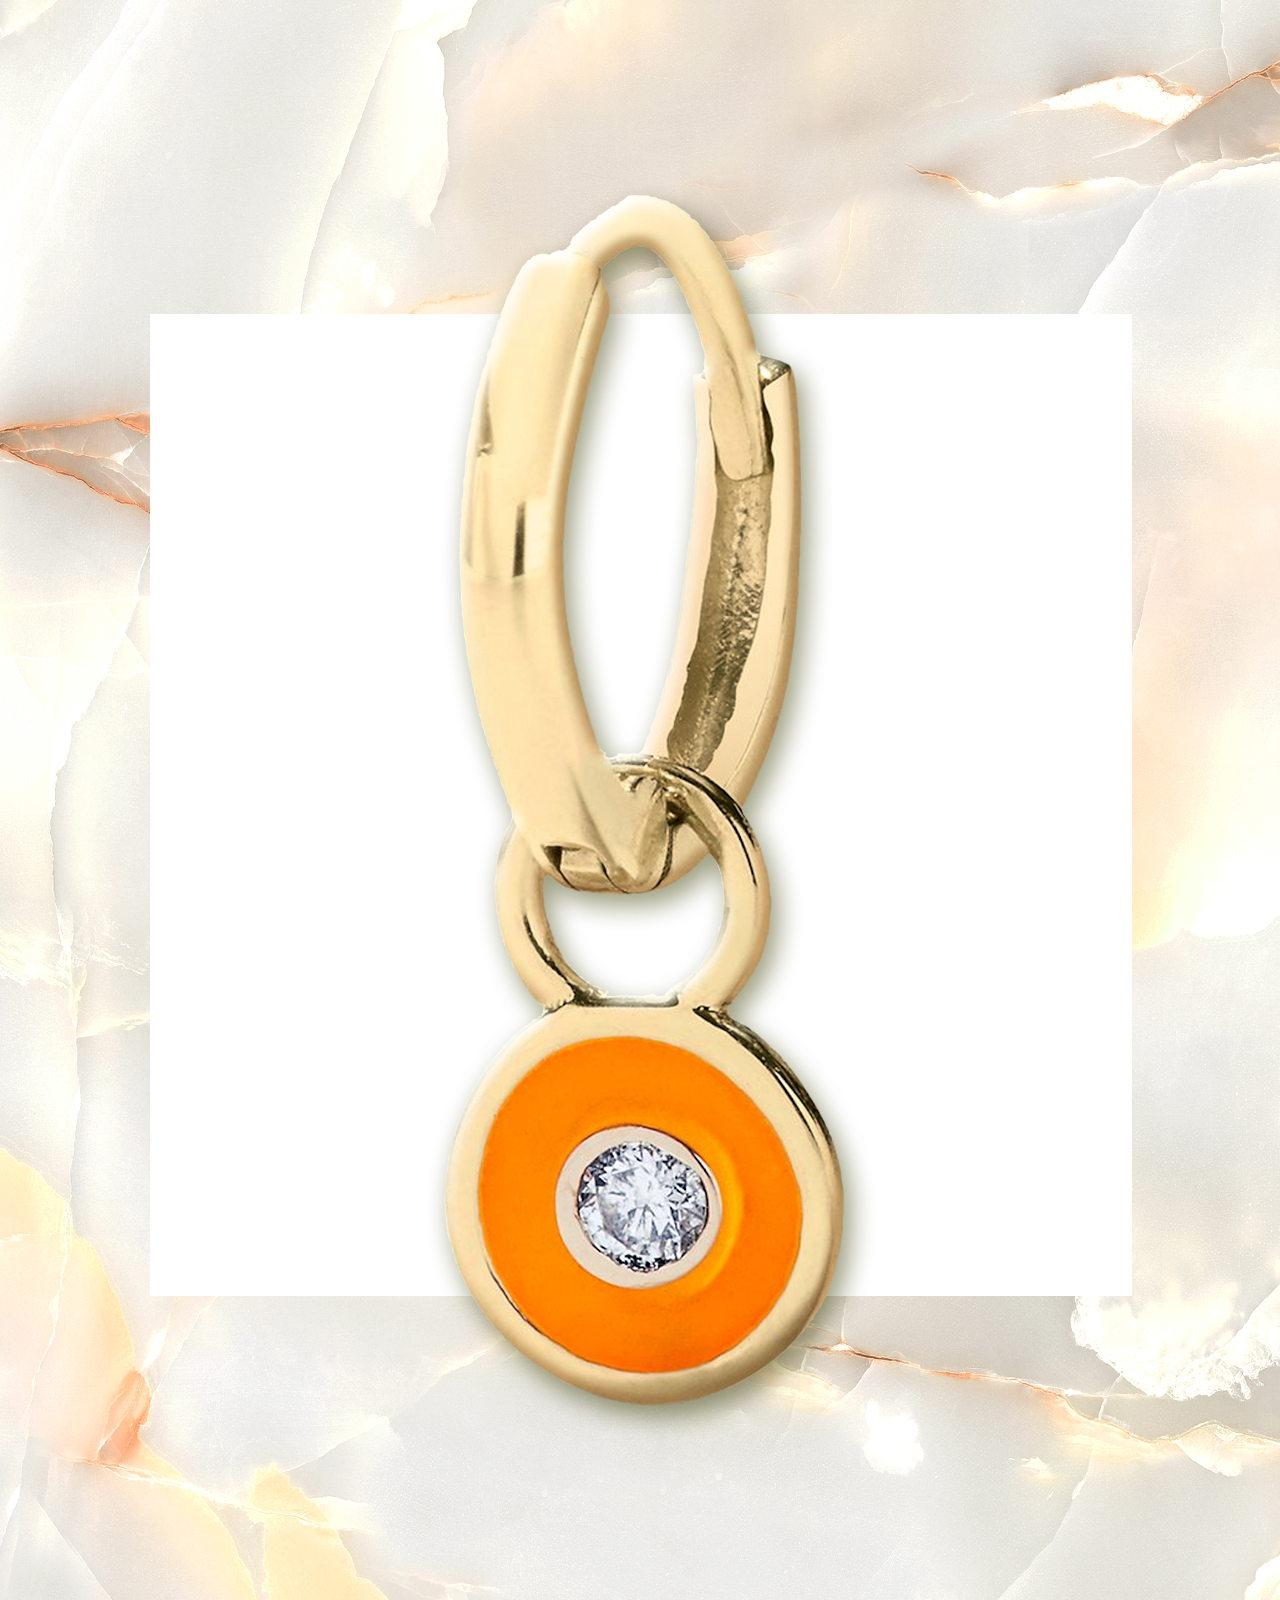 Single round cut diamond centered in an orange enamel pendant comprised of yellow gold from Alison Lou